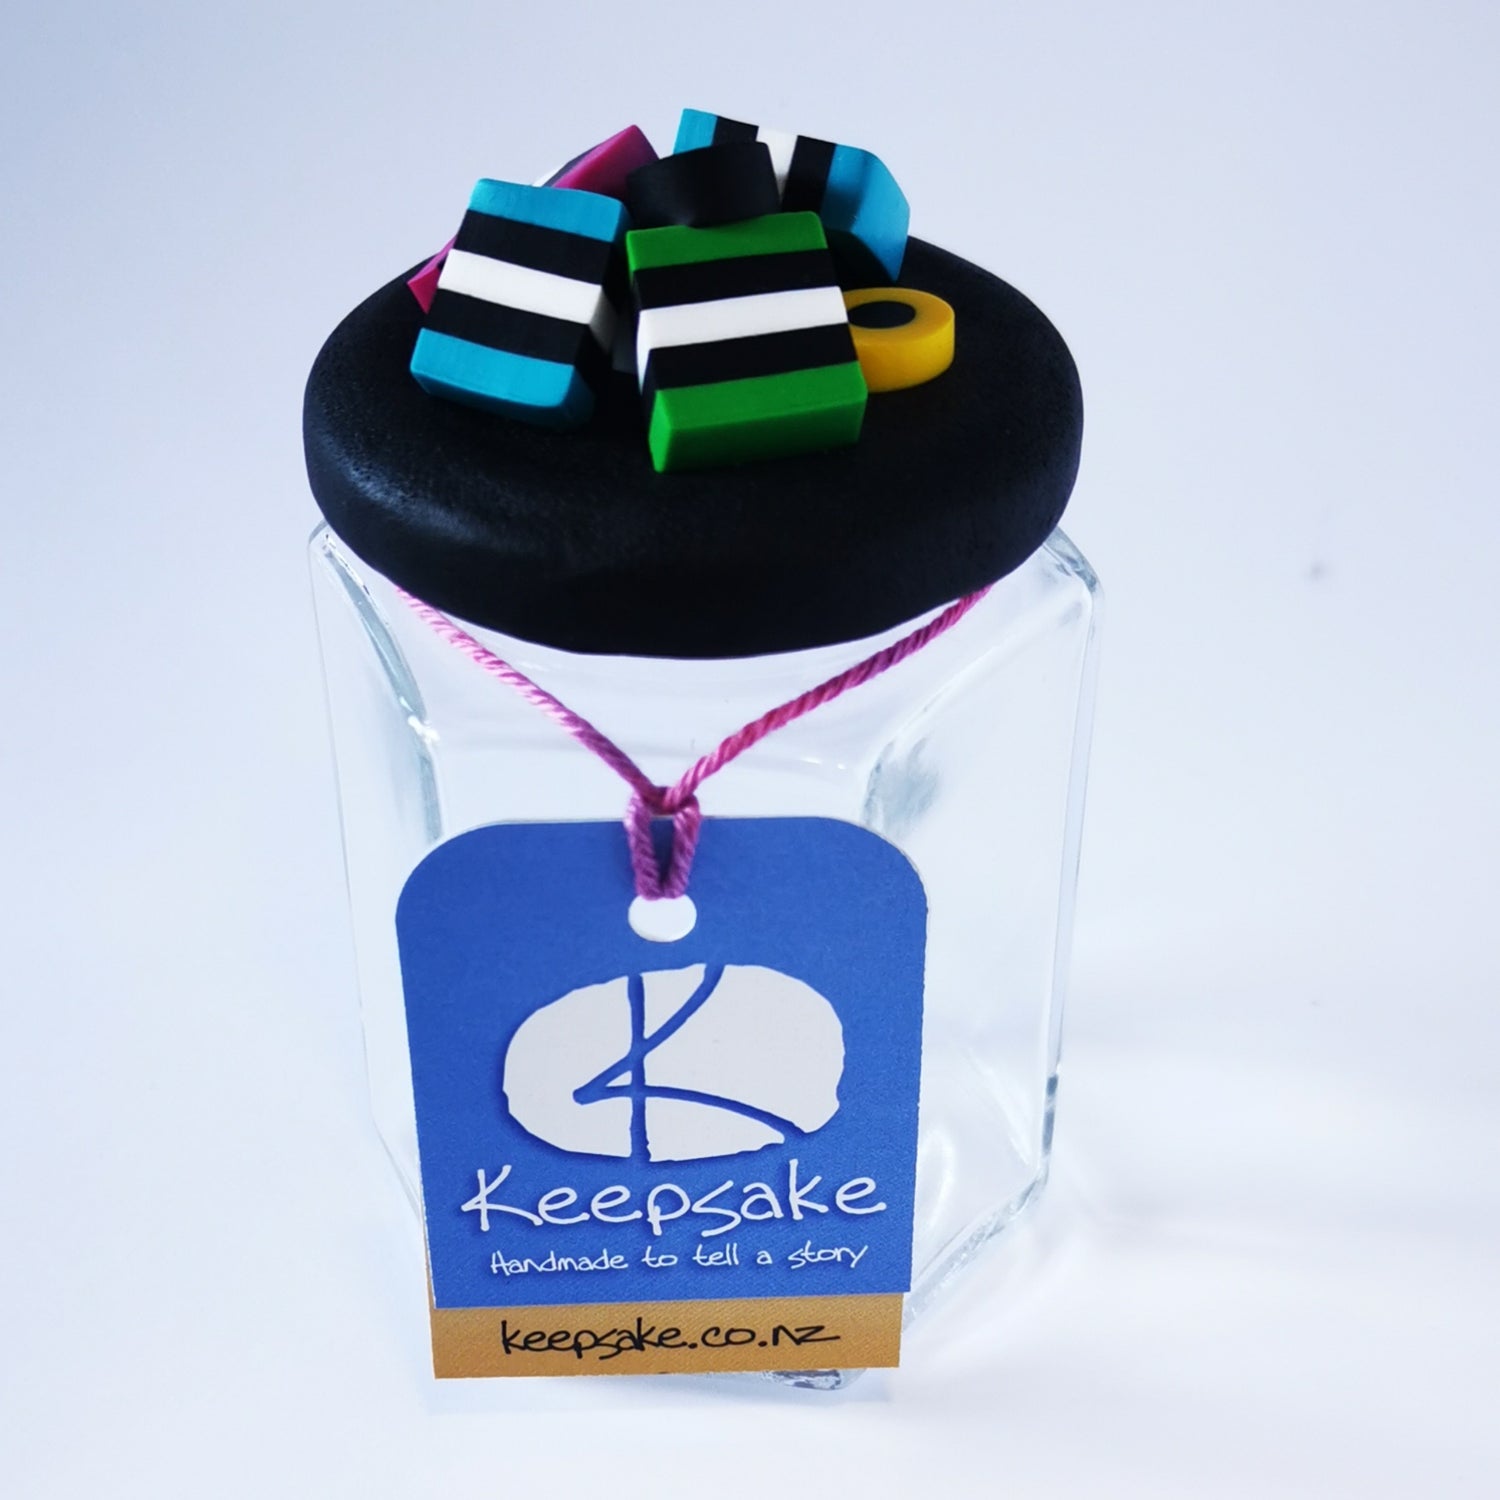 185ml glass hexagonal  jar and lid hand-decorated in New Zealand, with  an air-tight lid decorated with polymer clay licorice allsorts. Ready to be filled with licorice allsorts, sweets or other treasures.